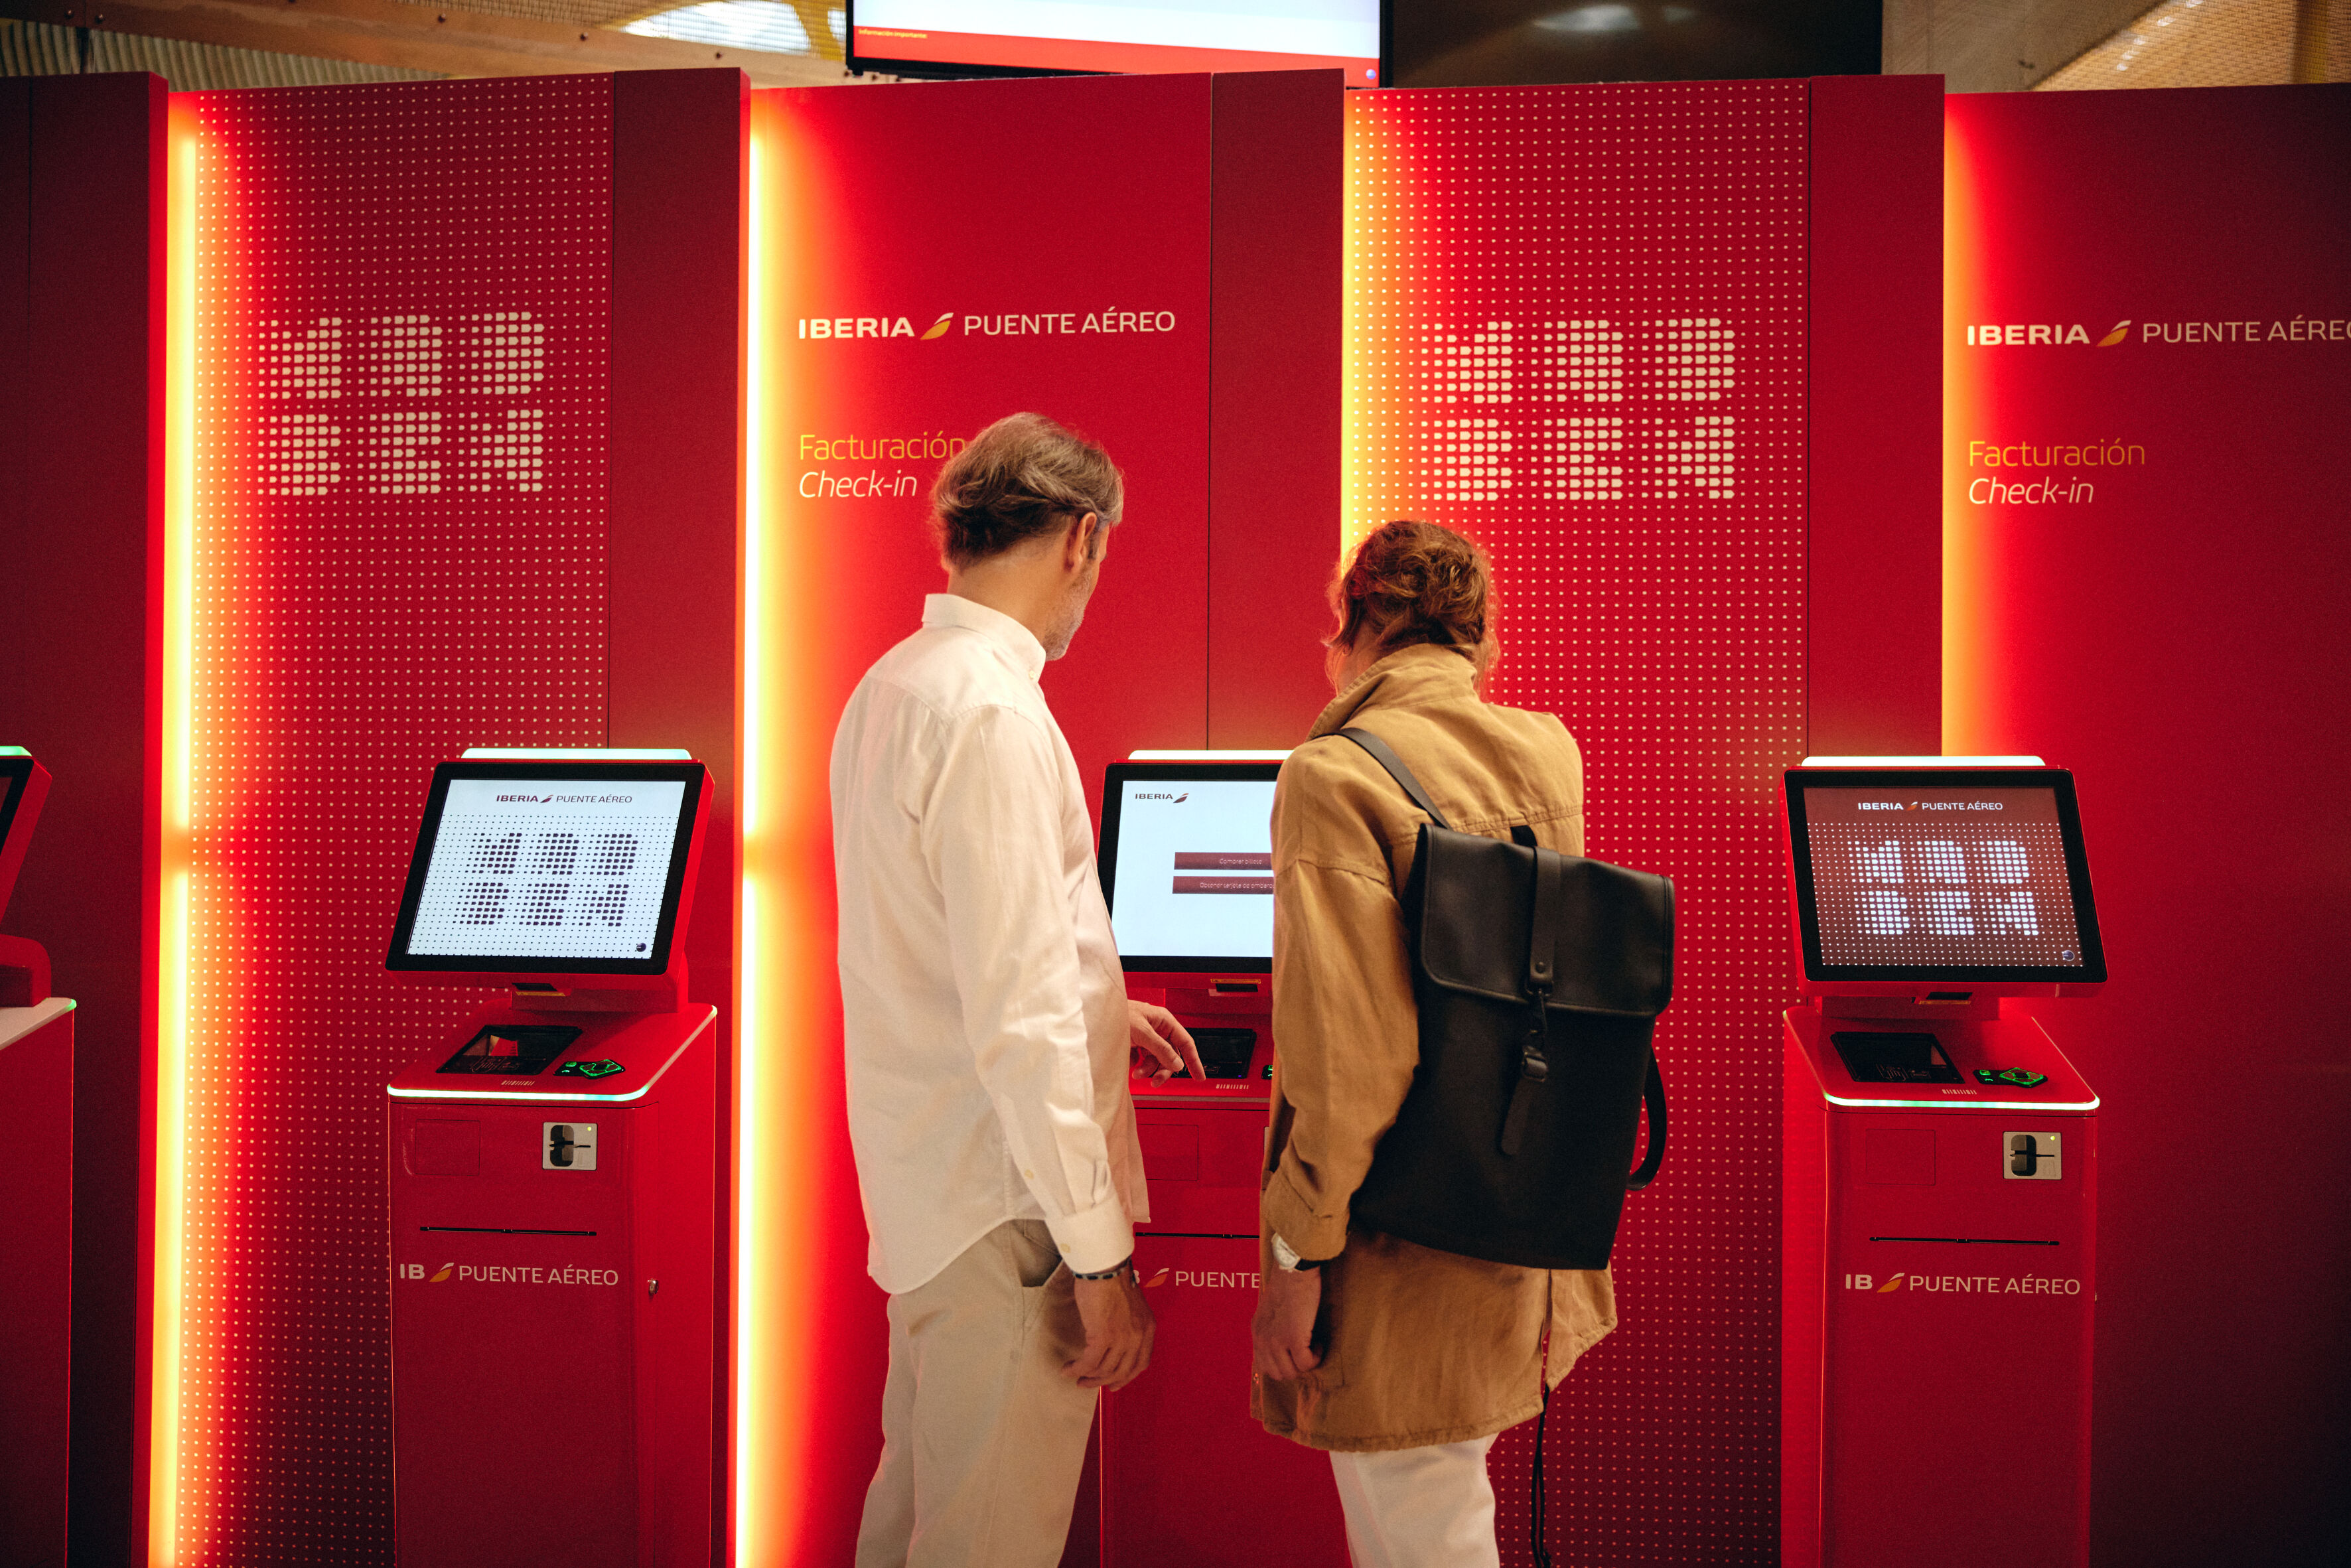 Iberia check-in kiosk being used